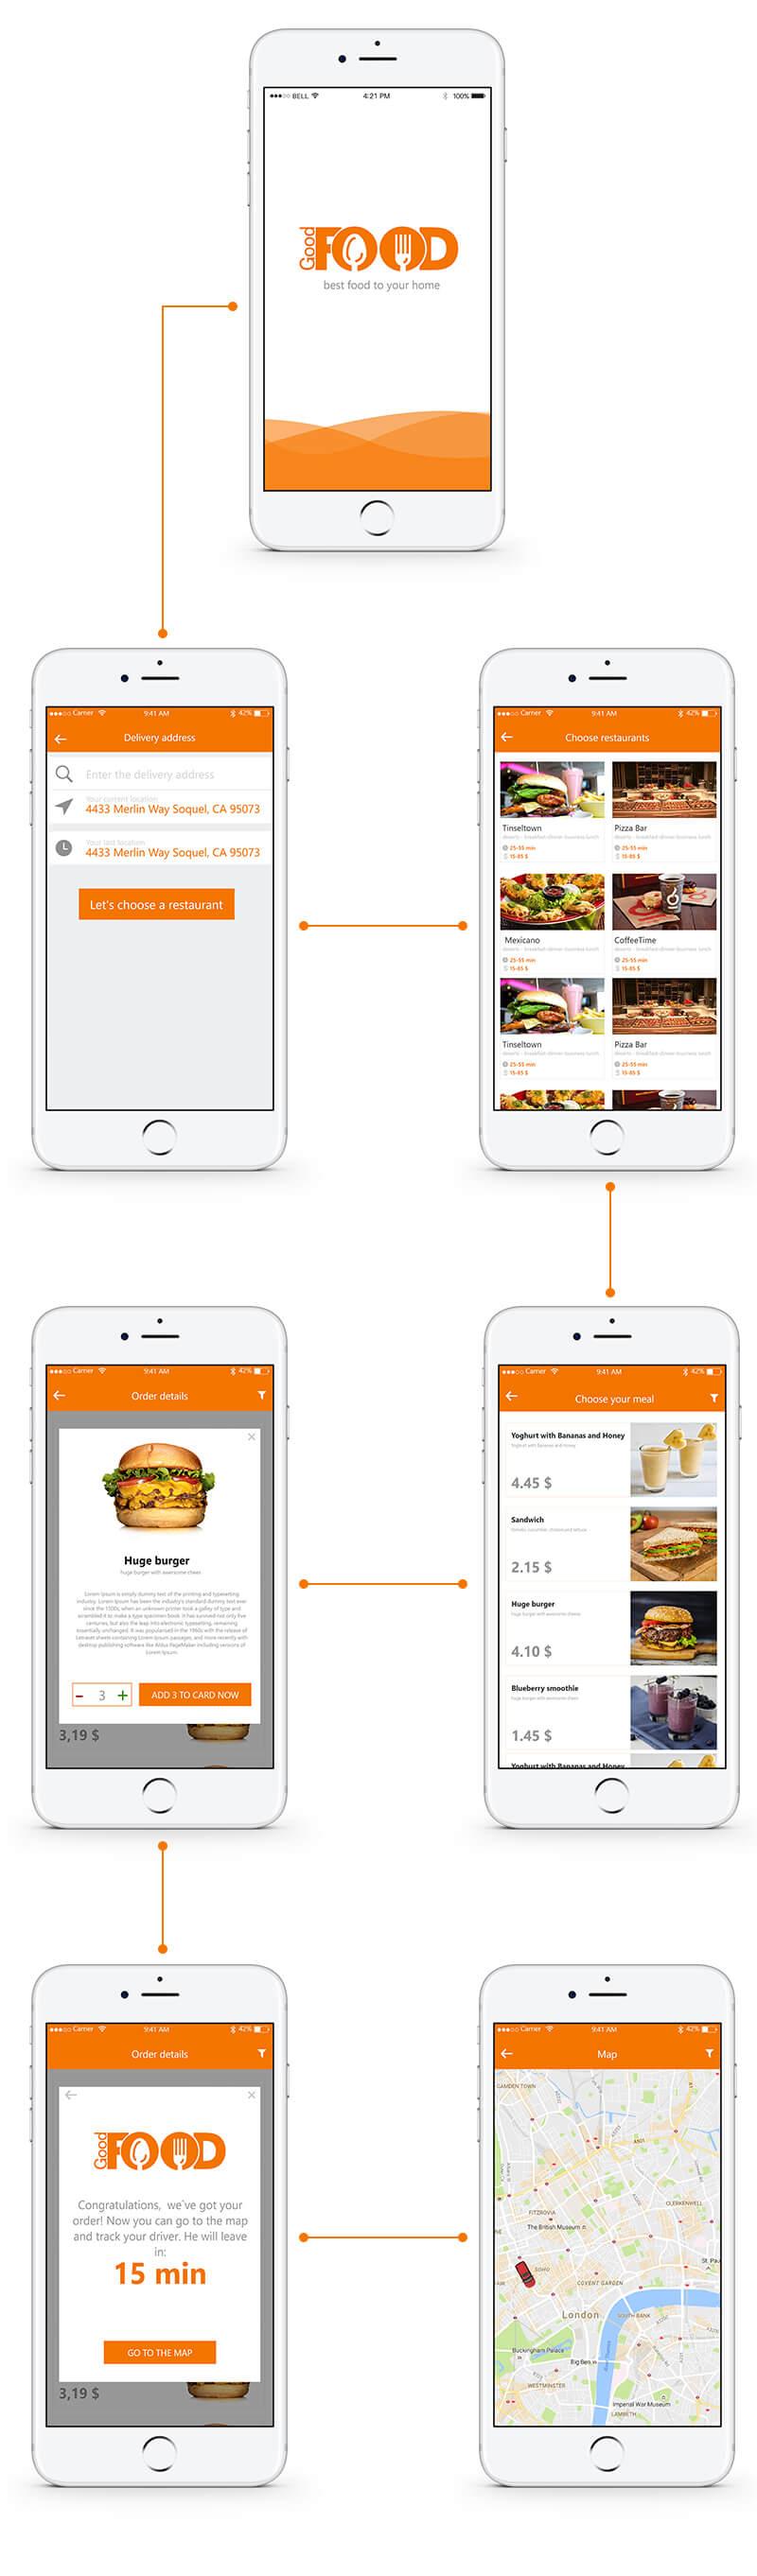 Main features of food ordering apps